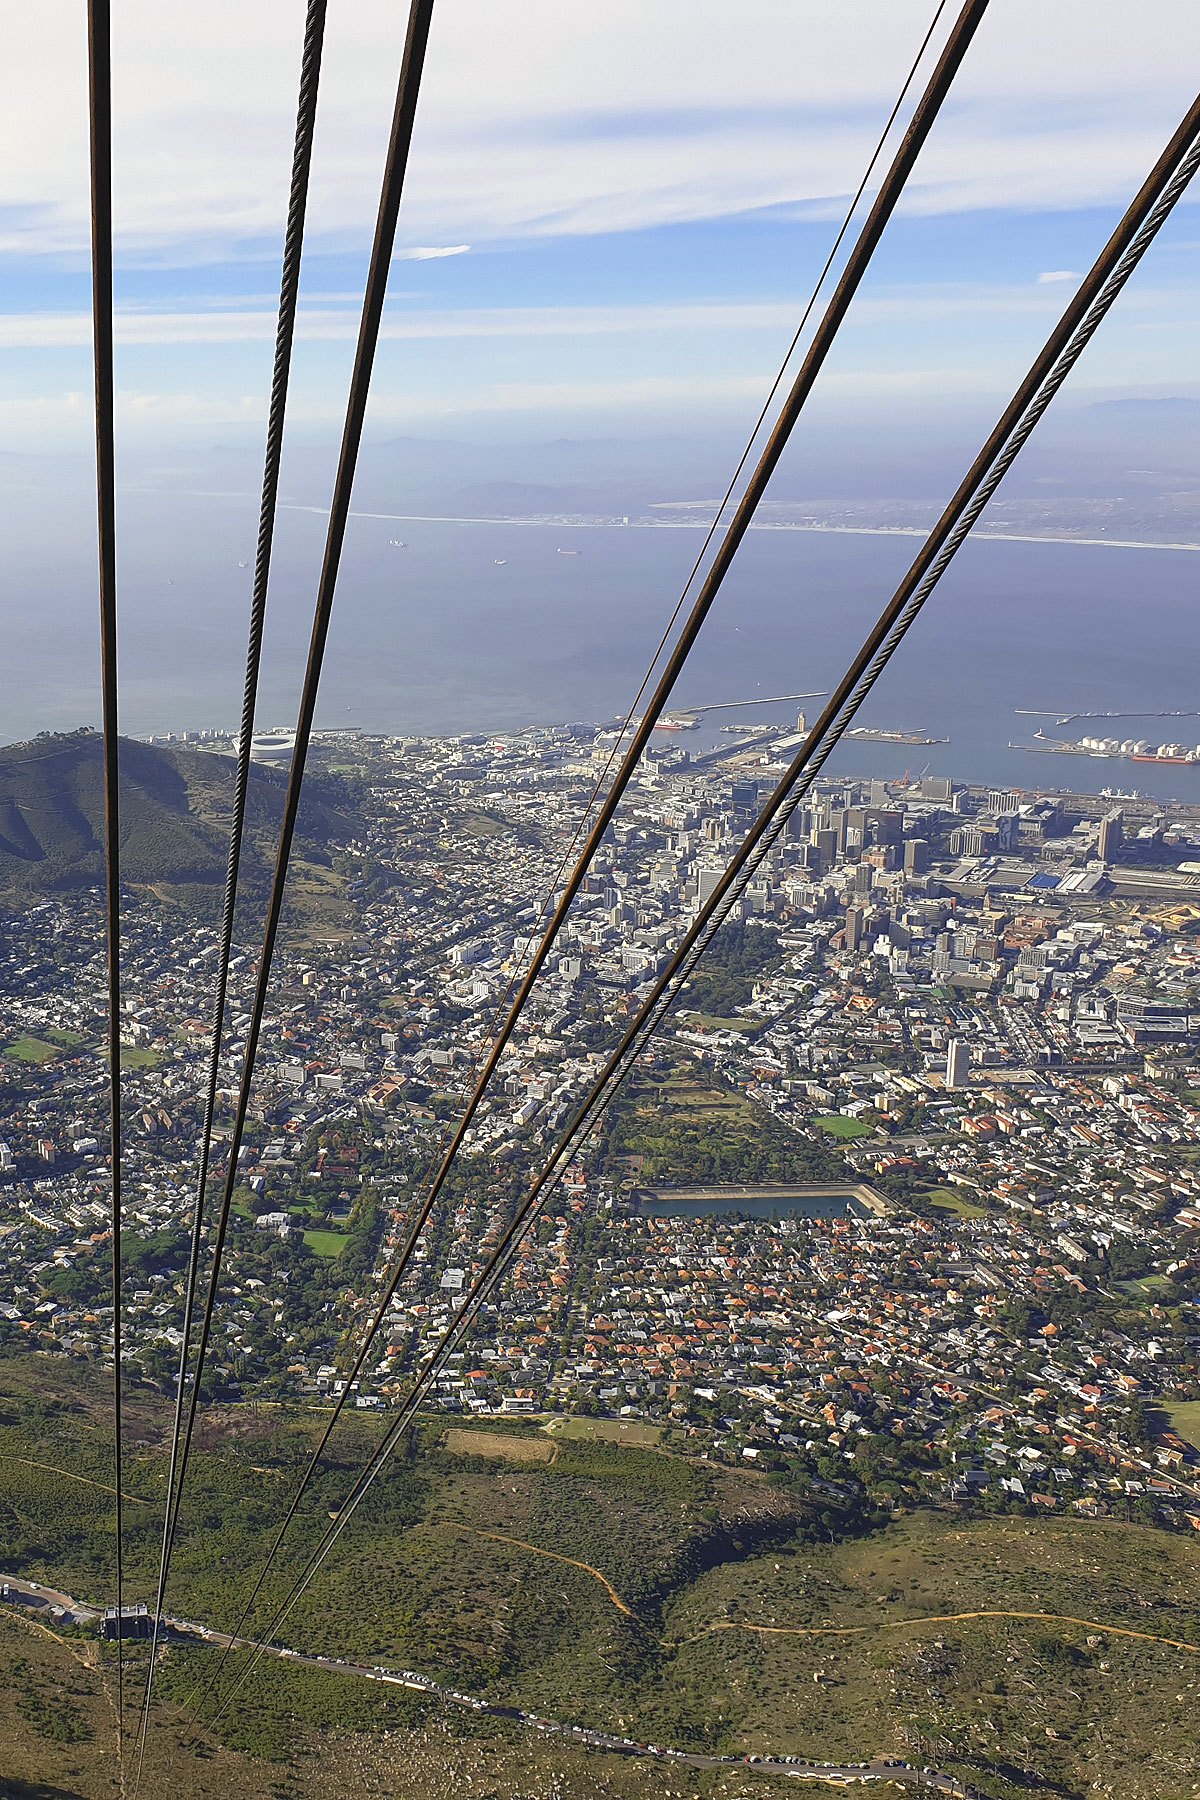 The descent of the cable car in Cape Town with the city in the background